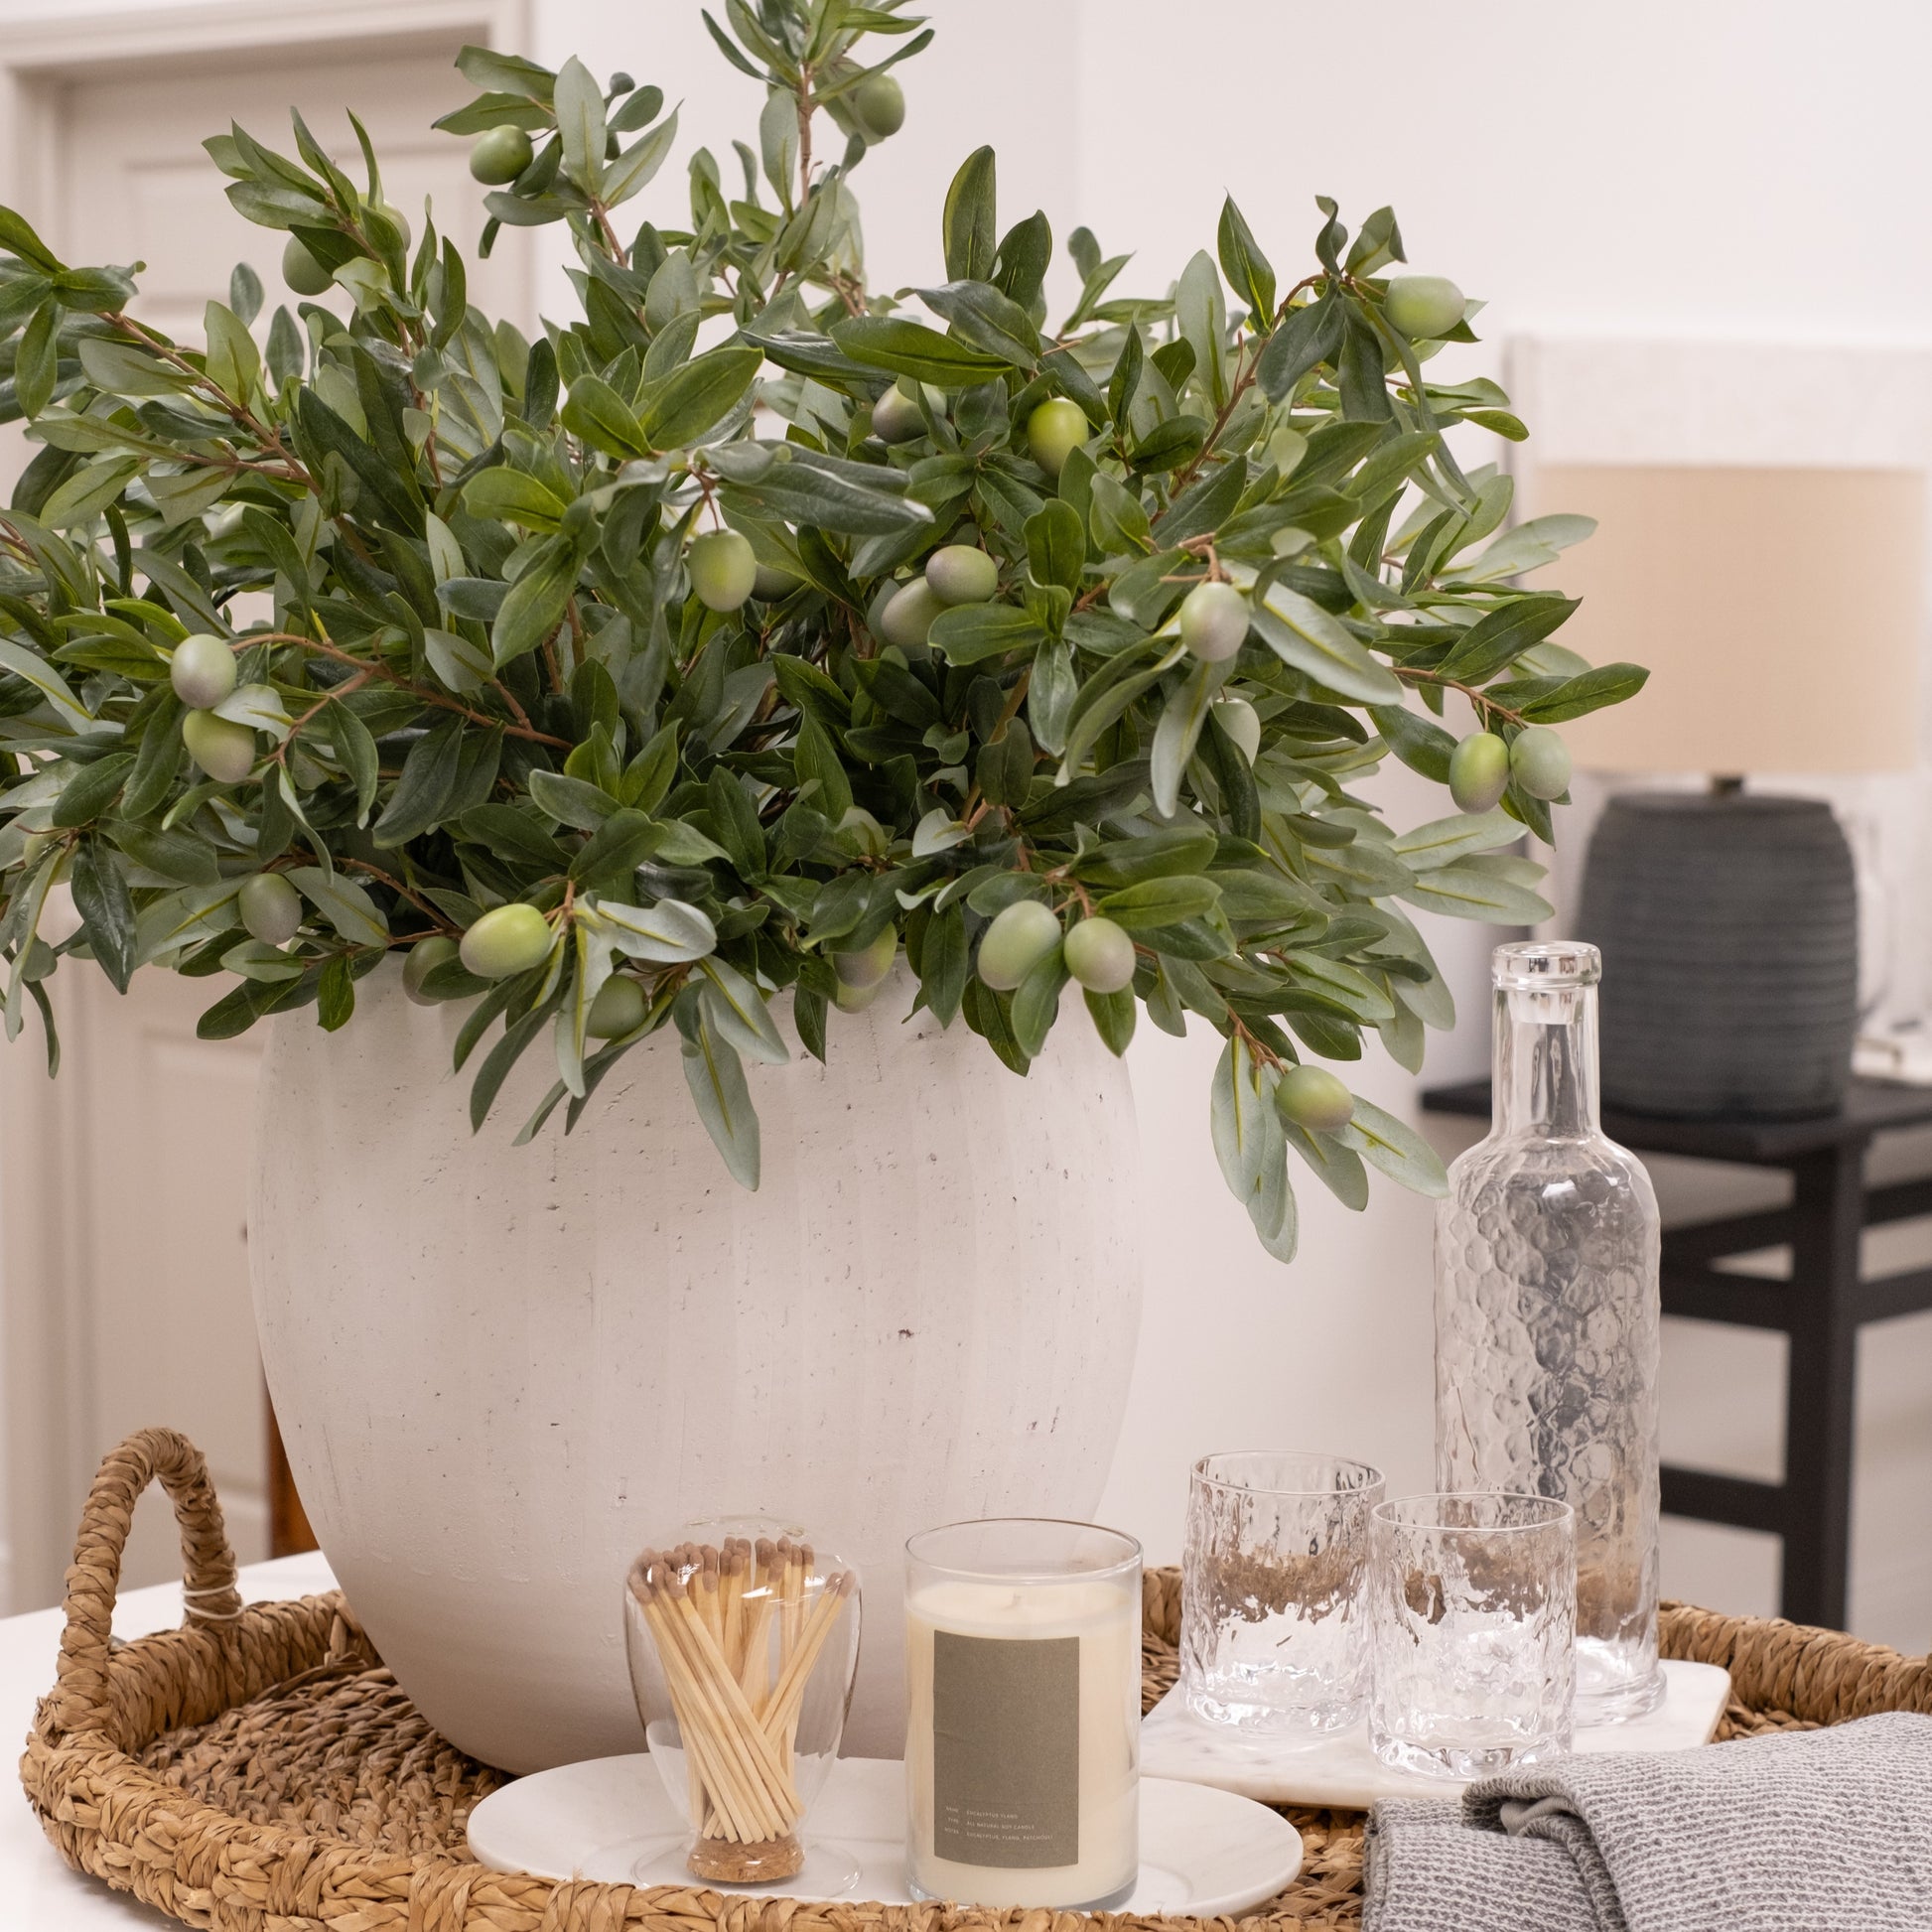 Large Matte White Malia Vase or Planter styled with Faux Olive Branches on Seagrass Tray